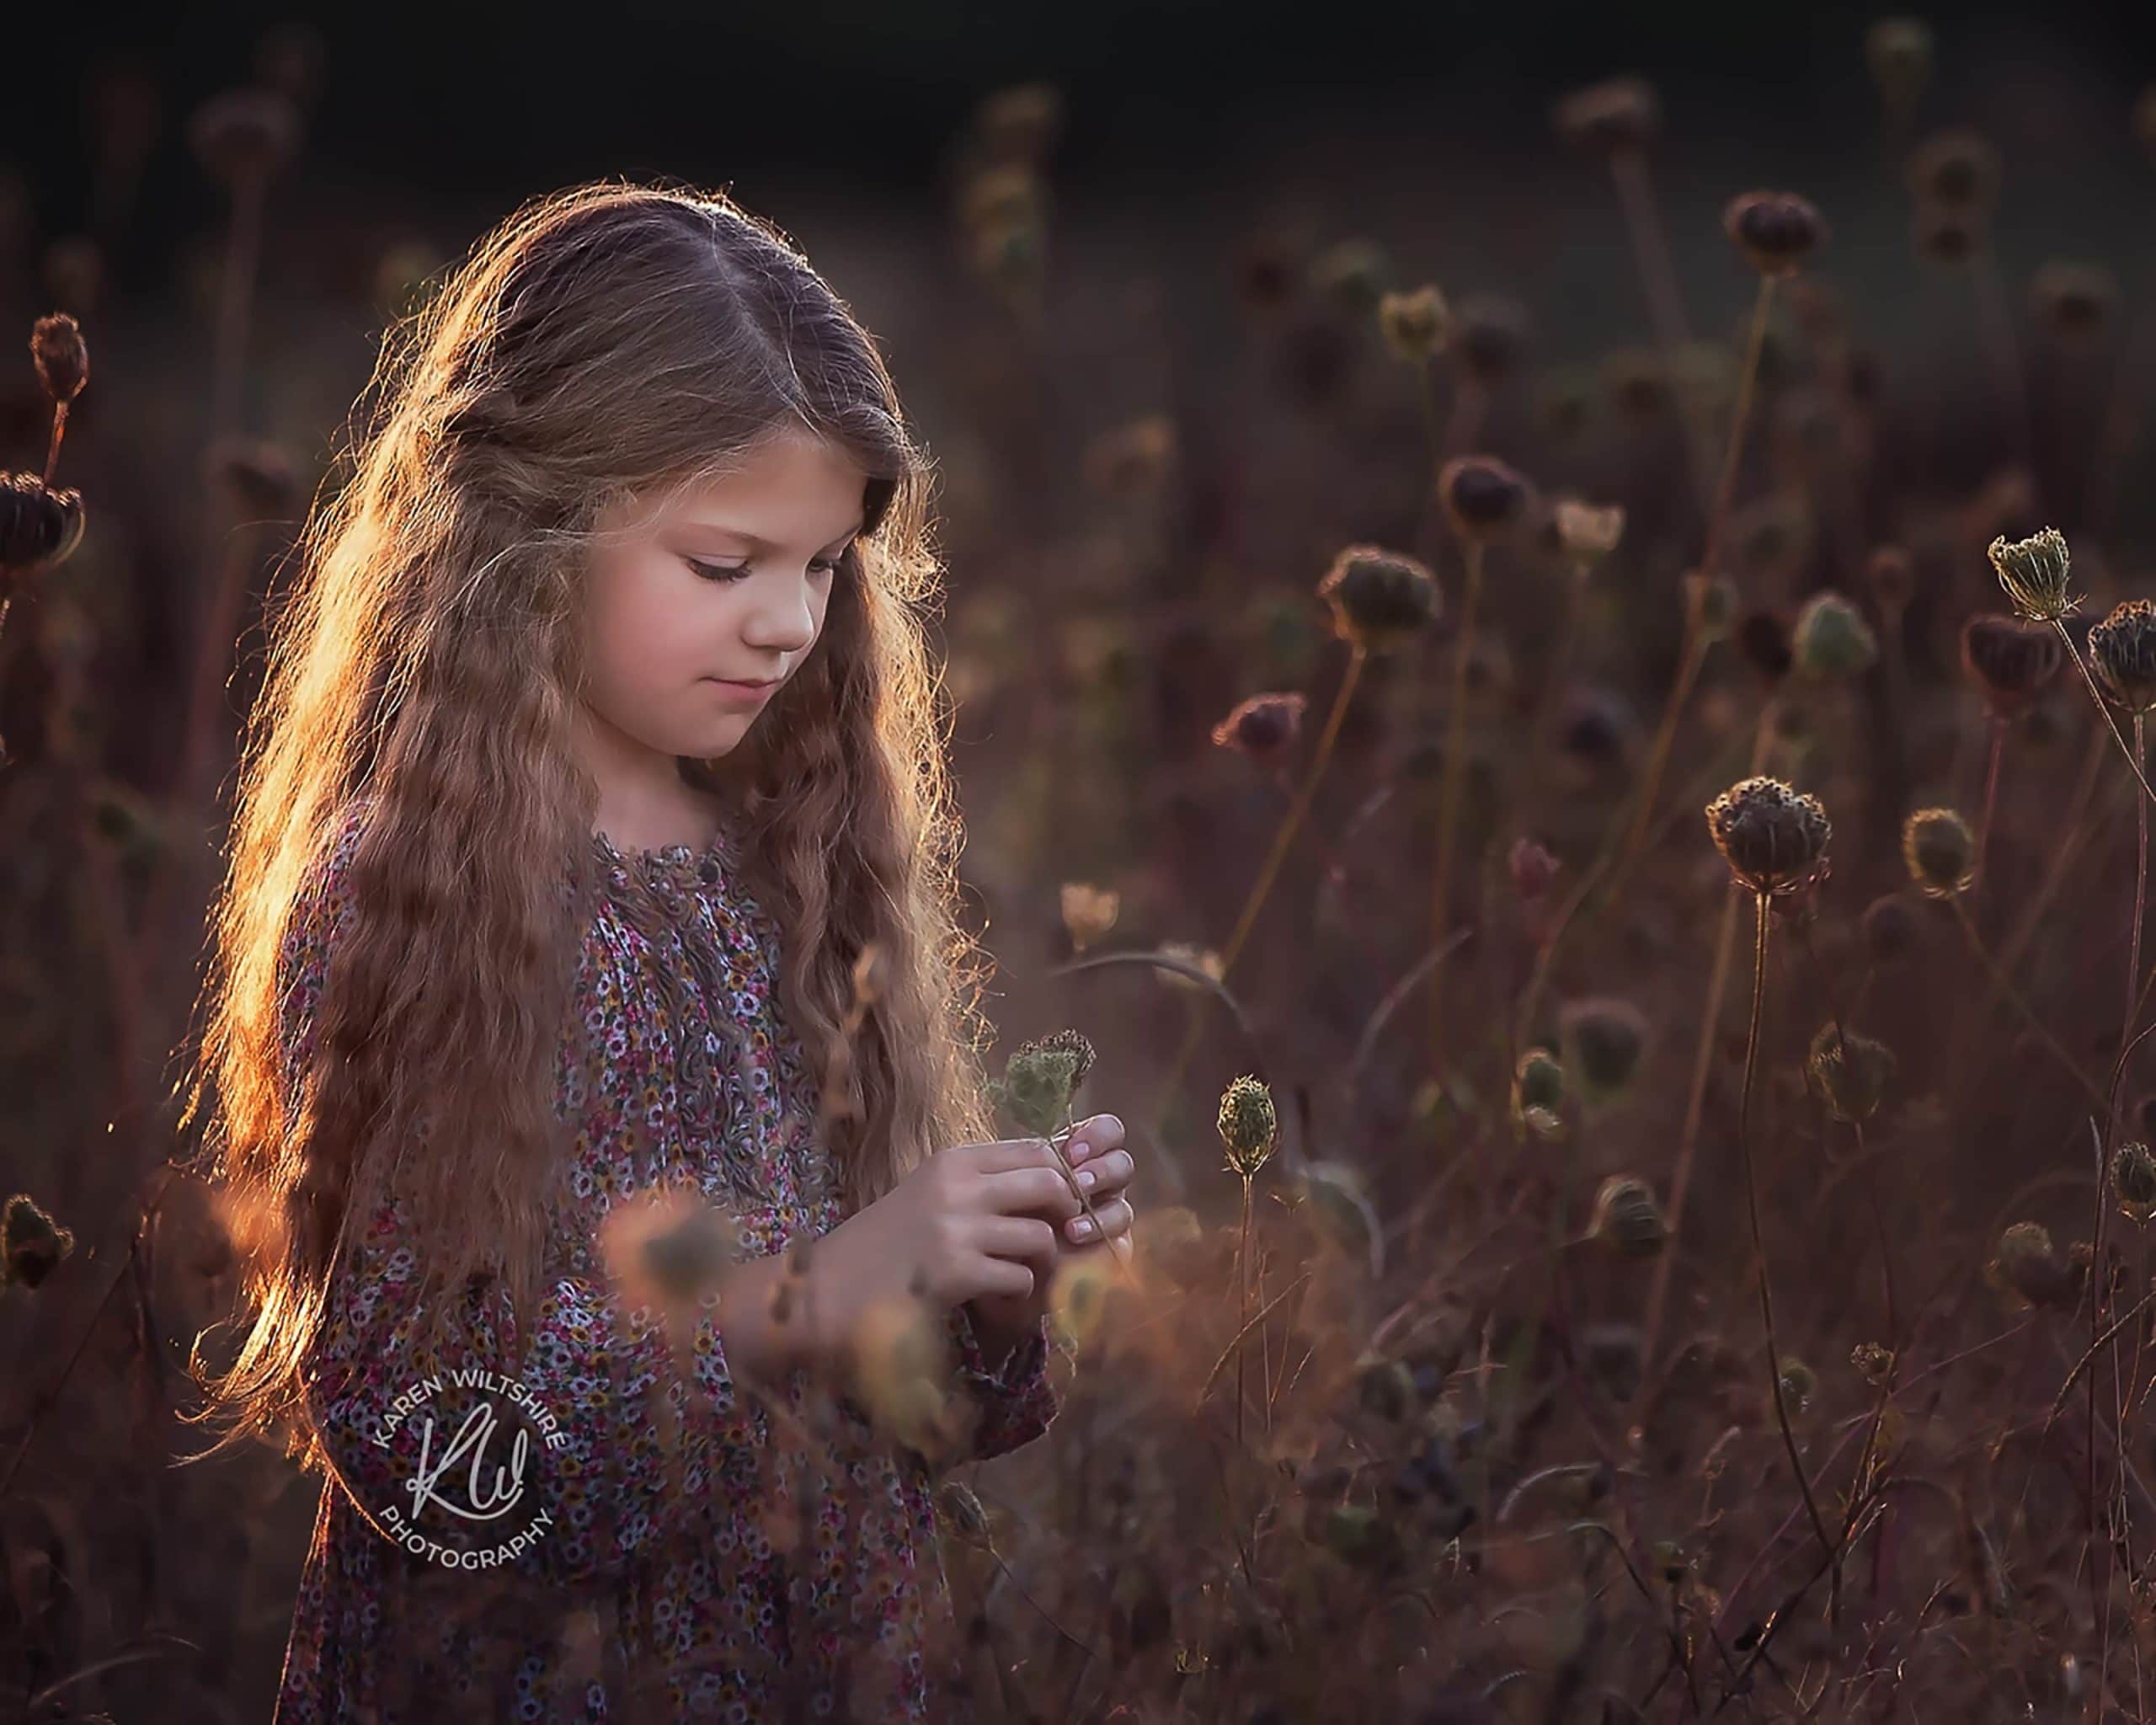 Long haired girl in field of seed heads